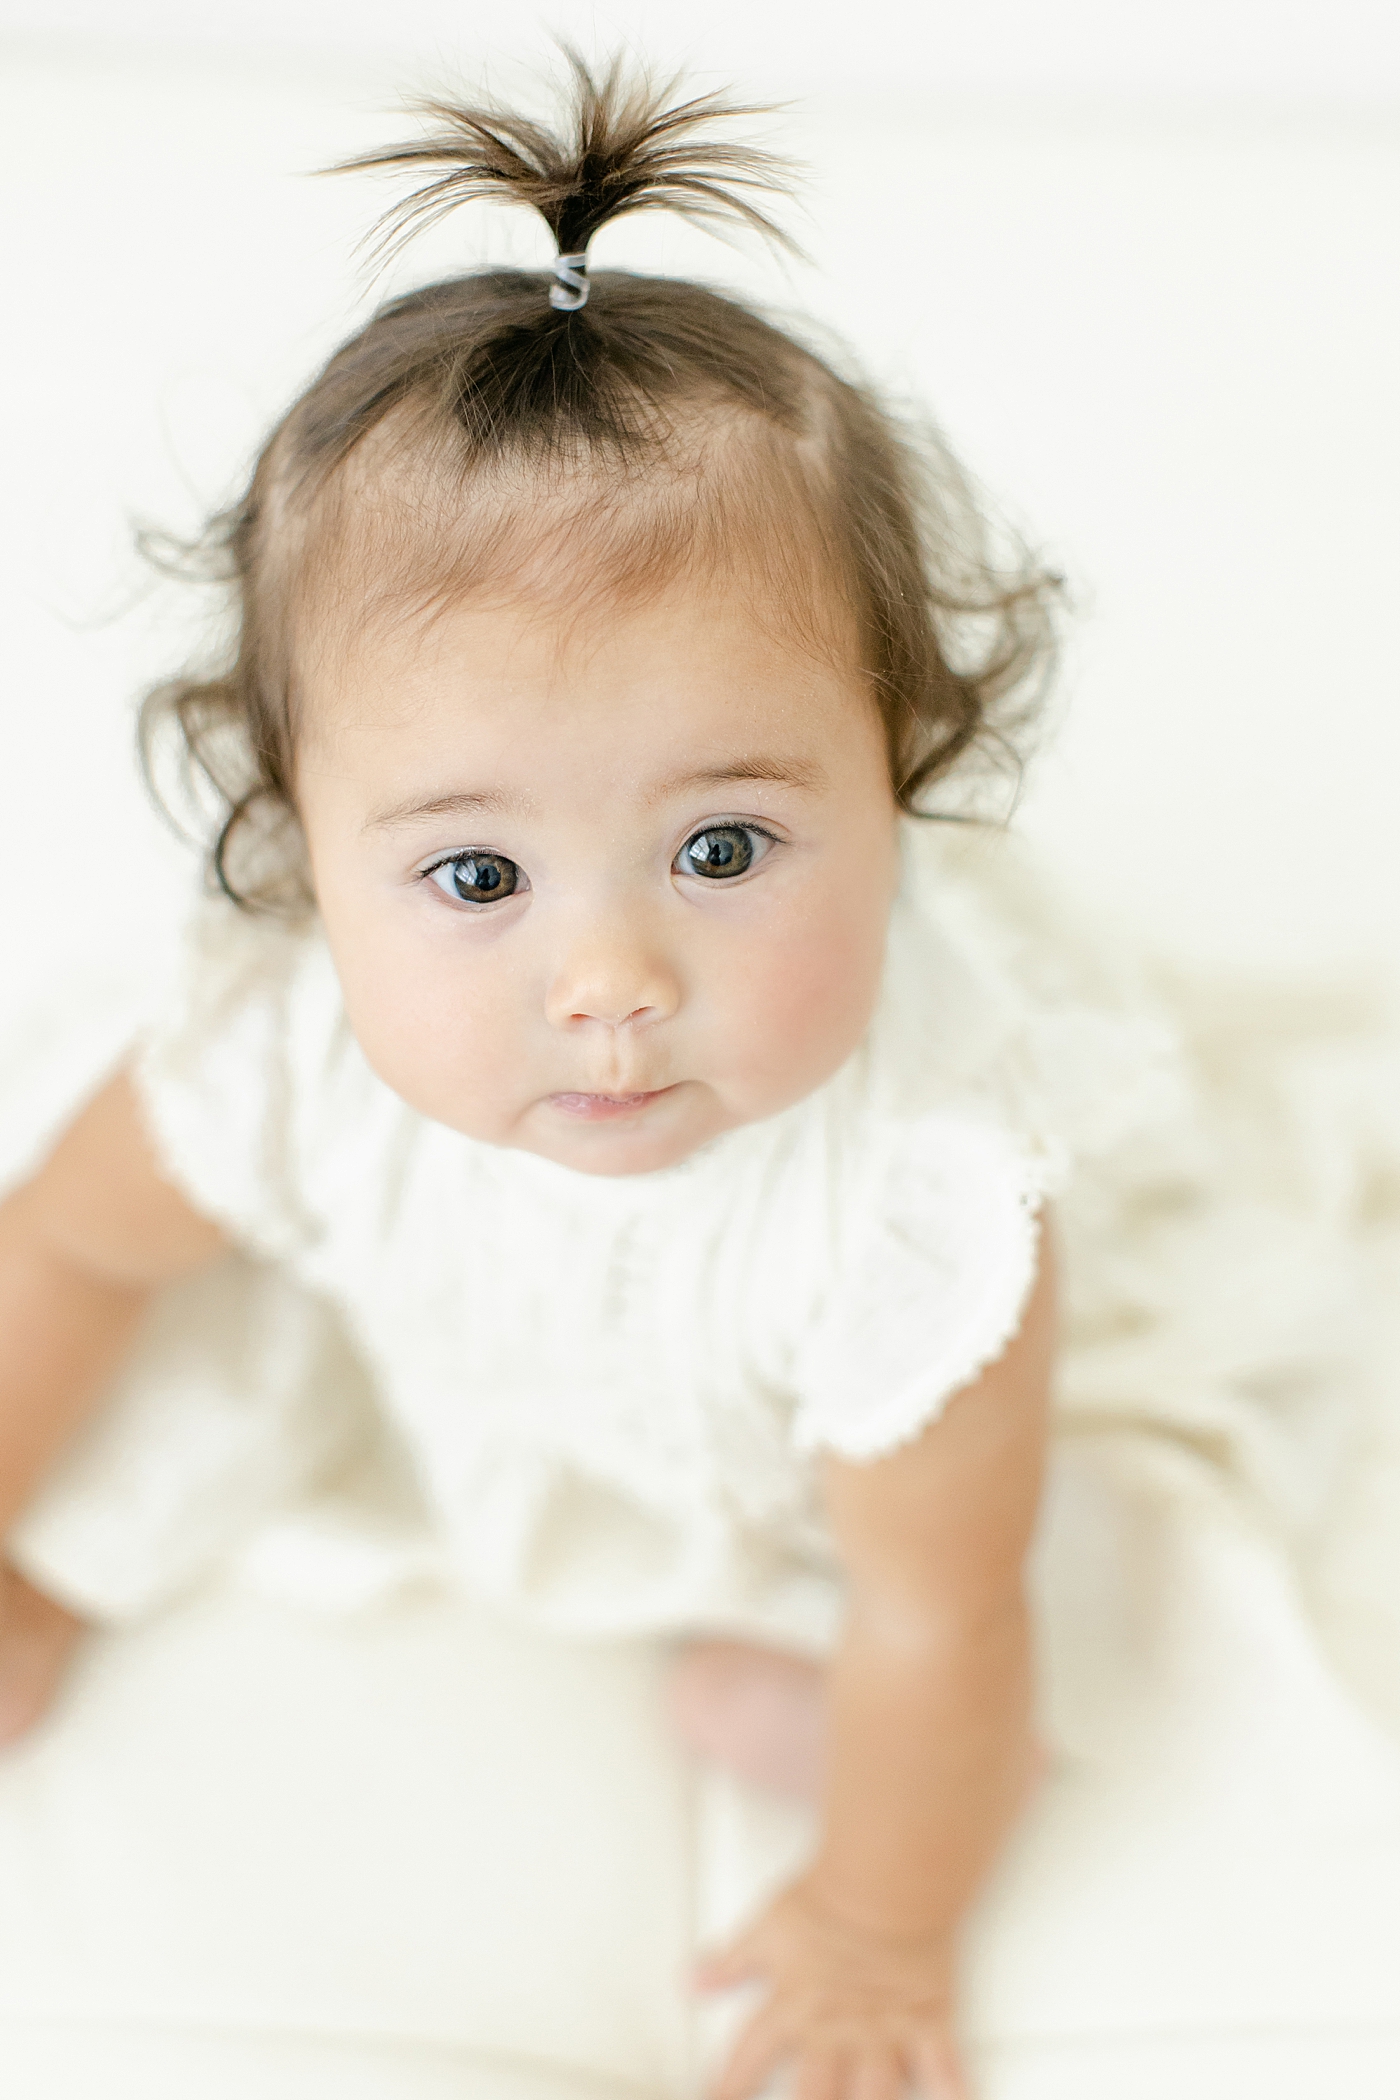 Detail of baby girl's eyes and her curls | Image by Chrissy Winchester Photography